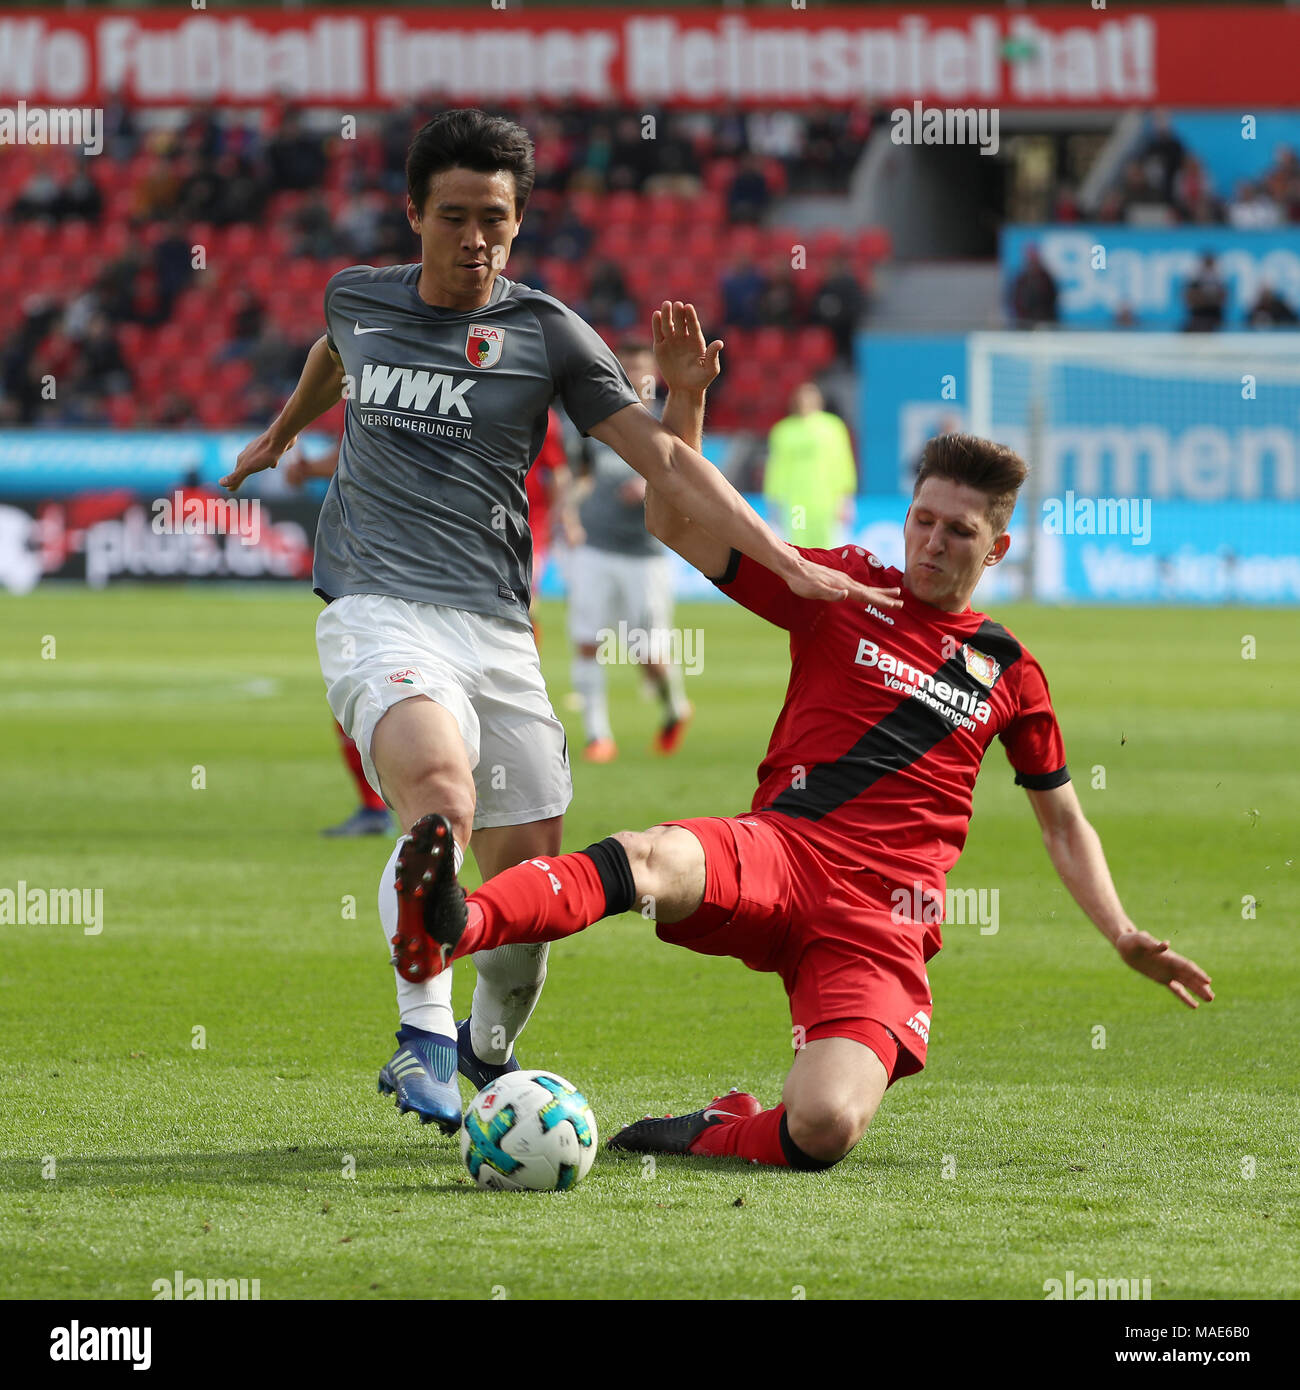 Leverkusen. 31st Mar, 2018. Retsos (R) of Bayer 04 Leverkusen vies with Koo Ja Cheol of FC Augsburg during the Bundesliga match between Bayer 04 Leverkusen and FC Augsburg at BayArena on March 31, 2018 in Leverkusen, Germany. The match ended with a 0-0 draw. Credit: Ulrich Hufnagel/Xinhua/Alamy Live News Stock Photo